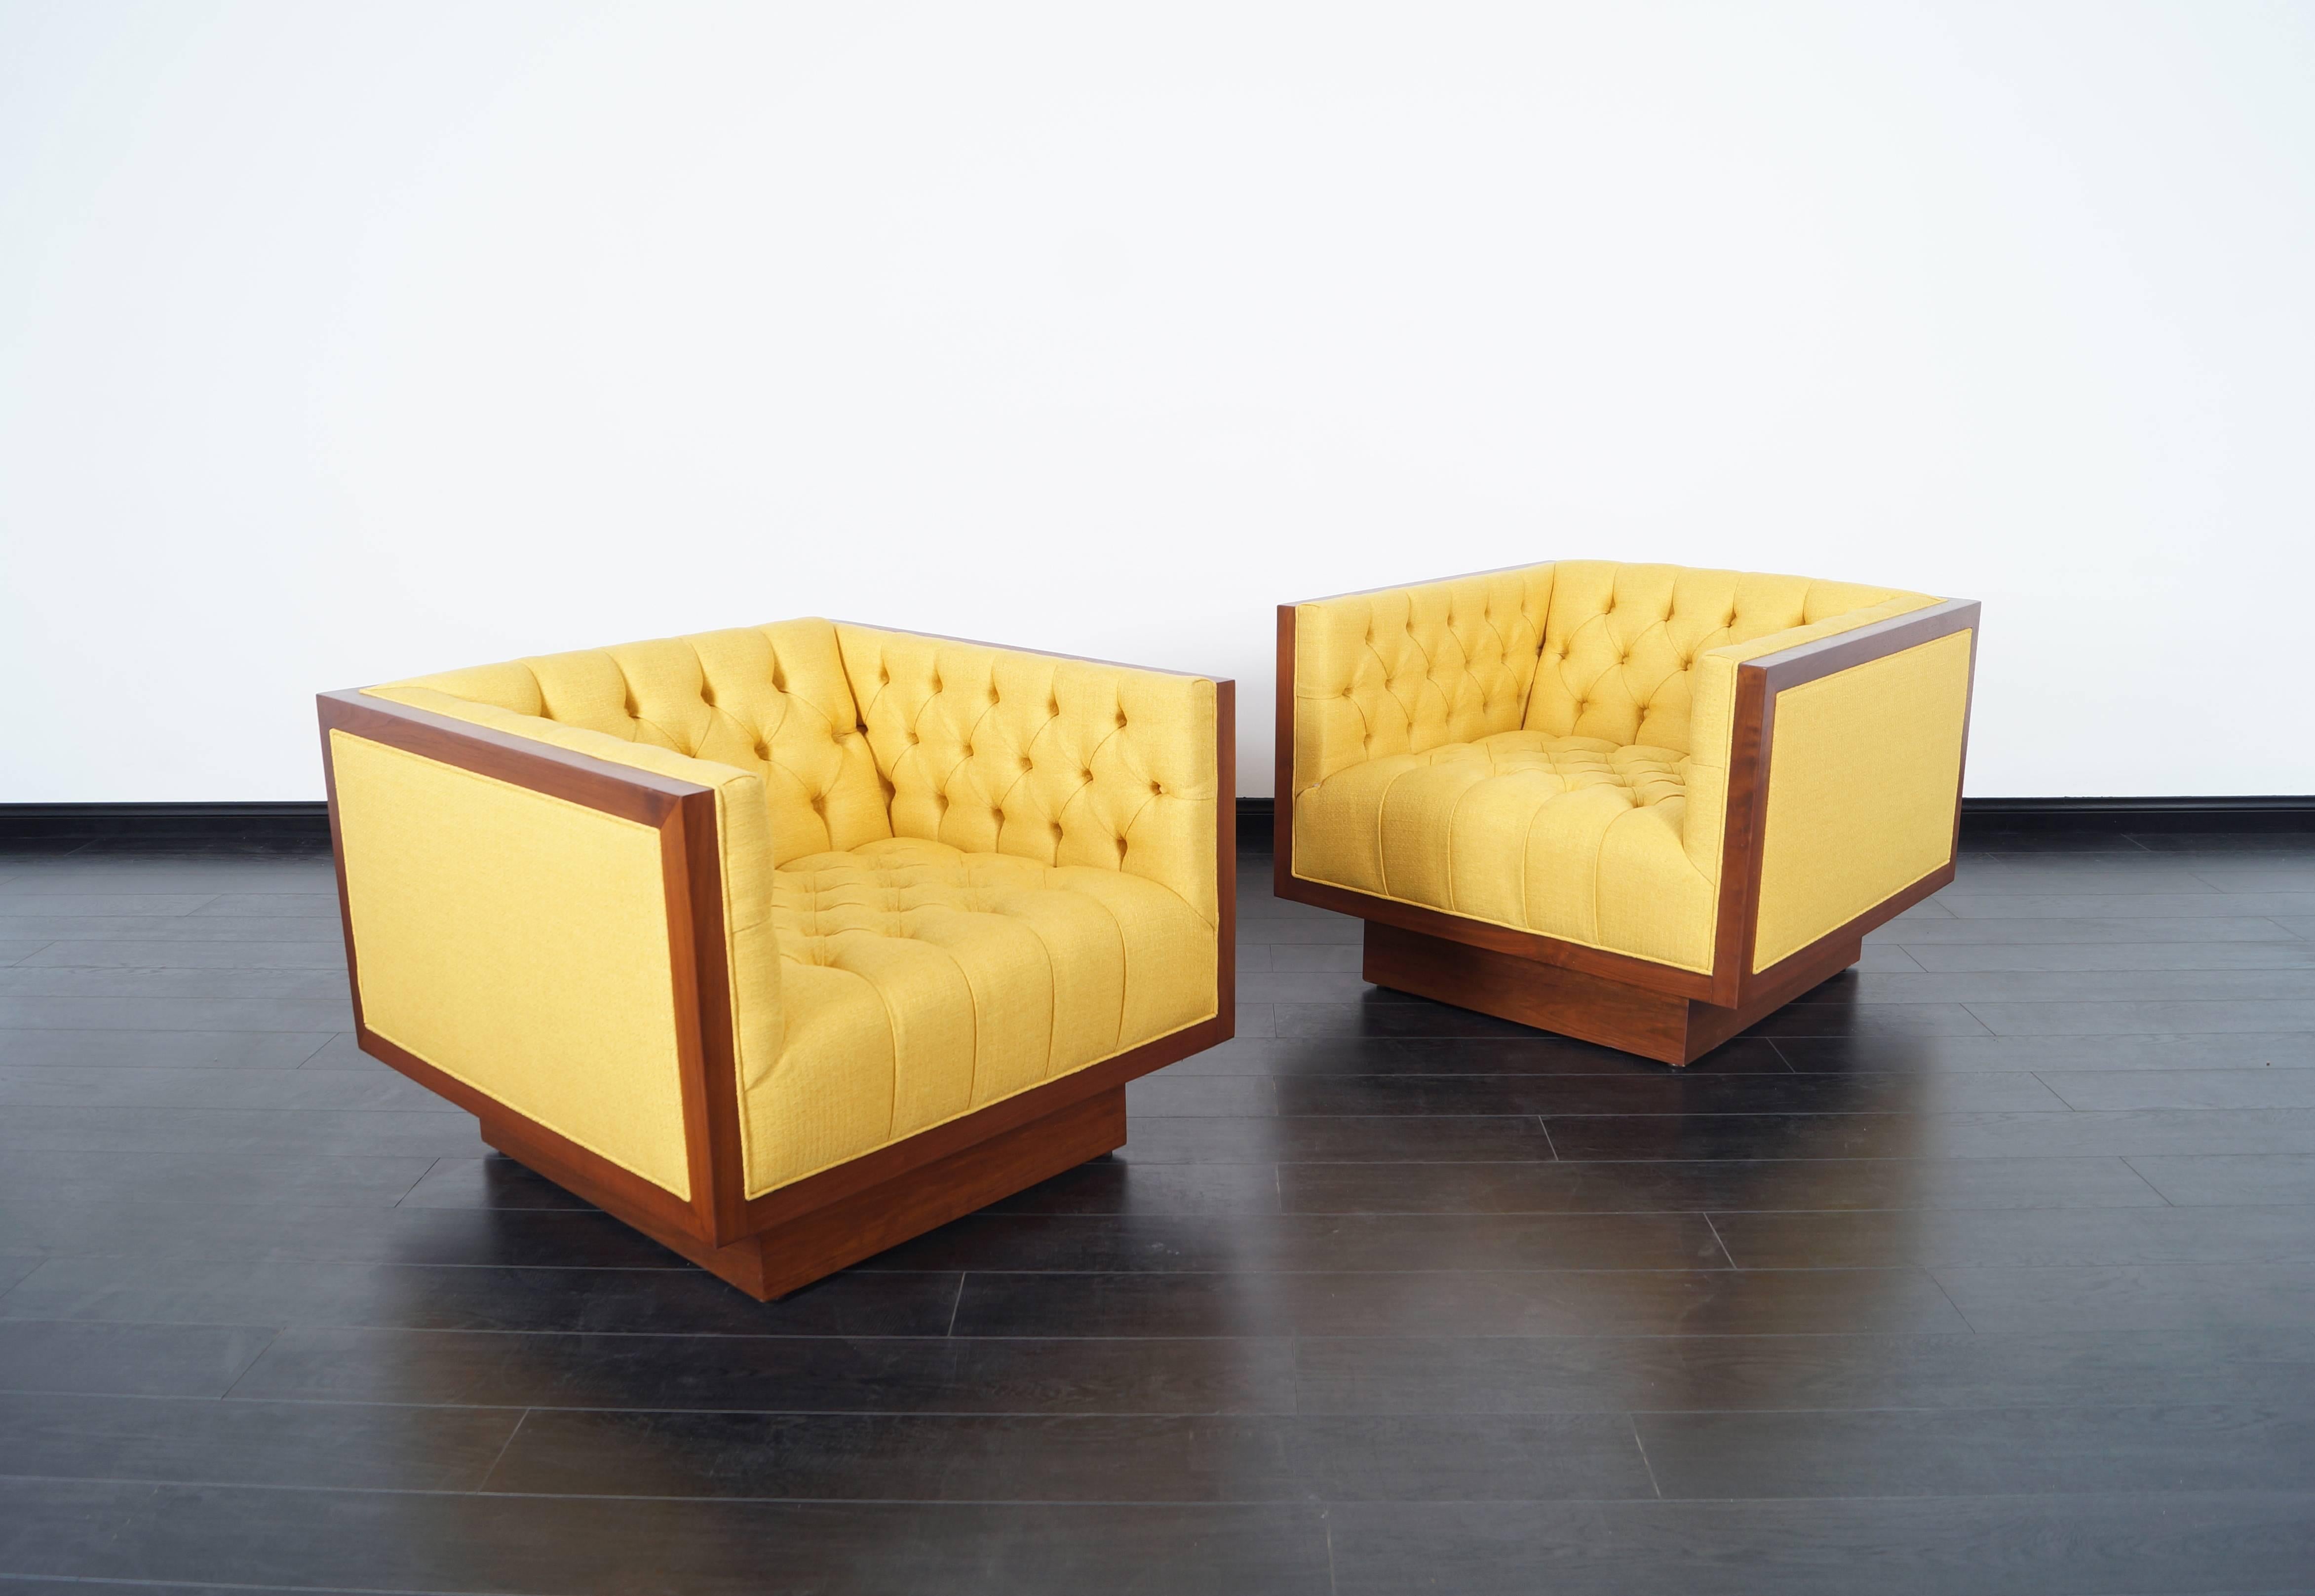 Fabulous oversized walnut lounge chairs attributed to Milo Baughman. These spectacular chairs are simply amazing!